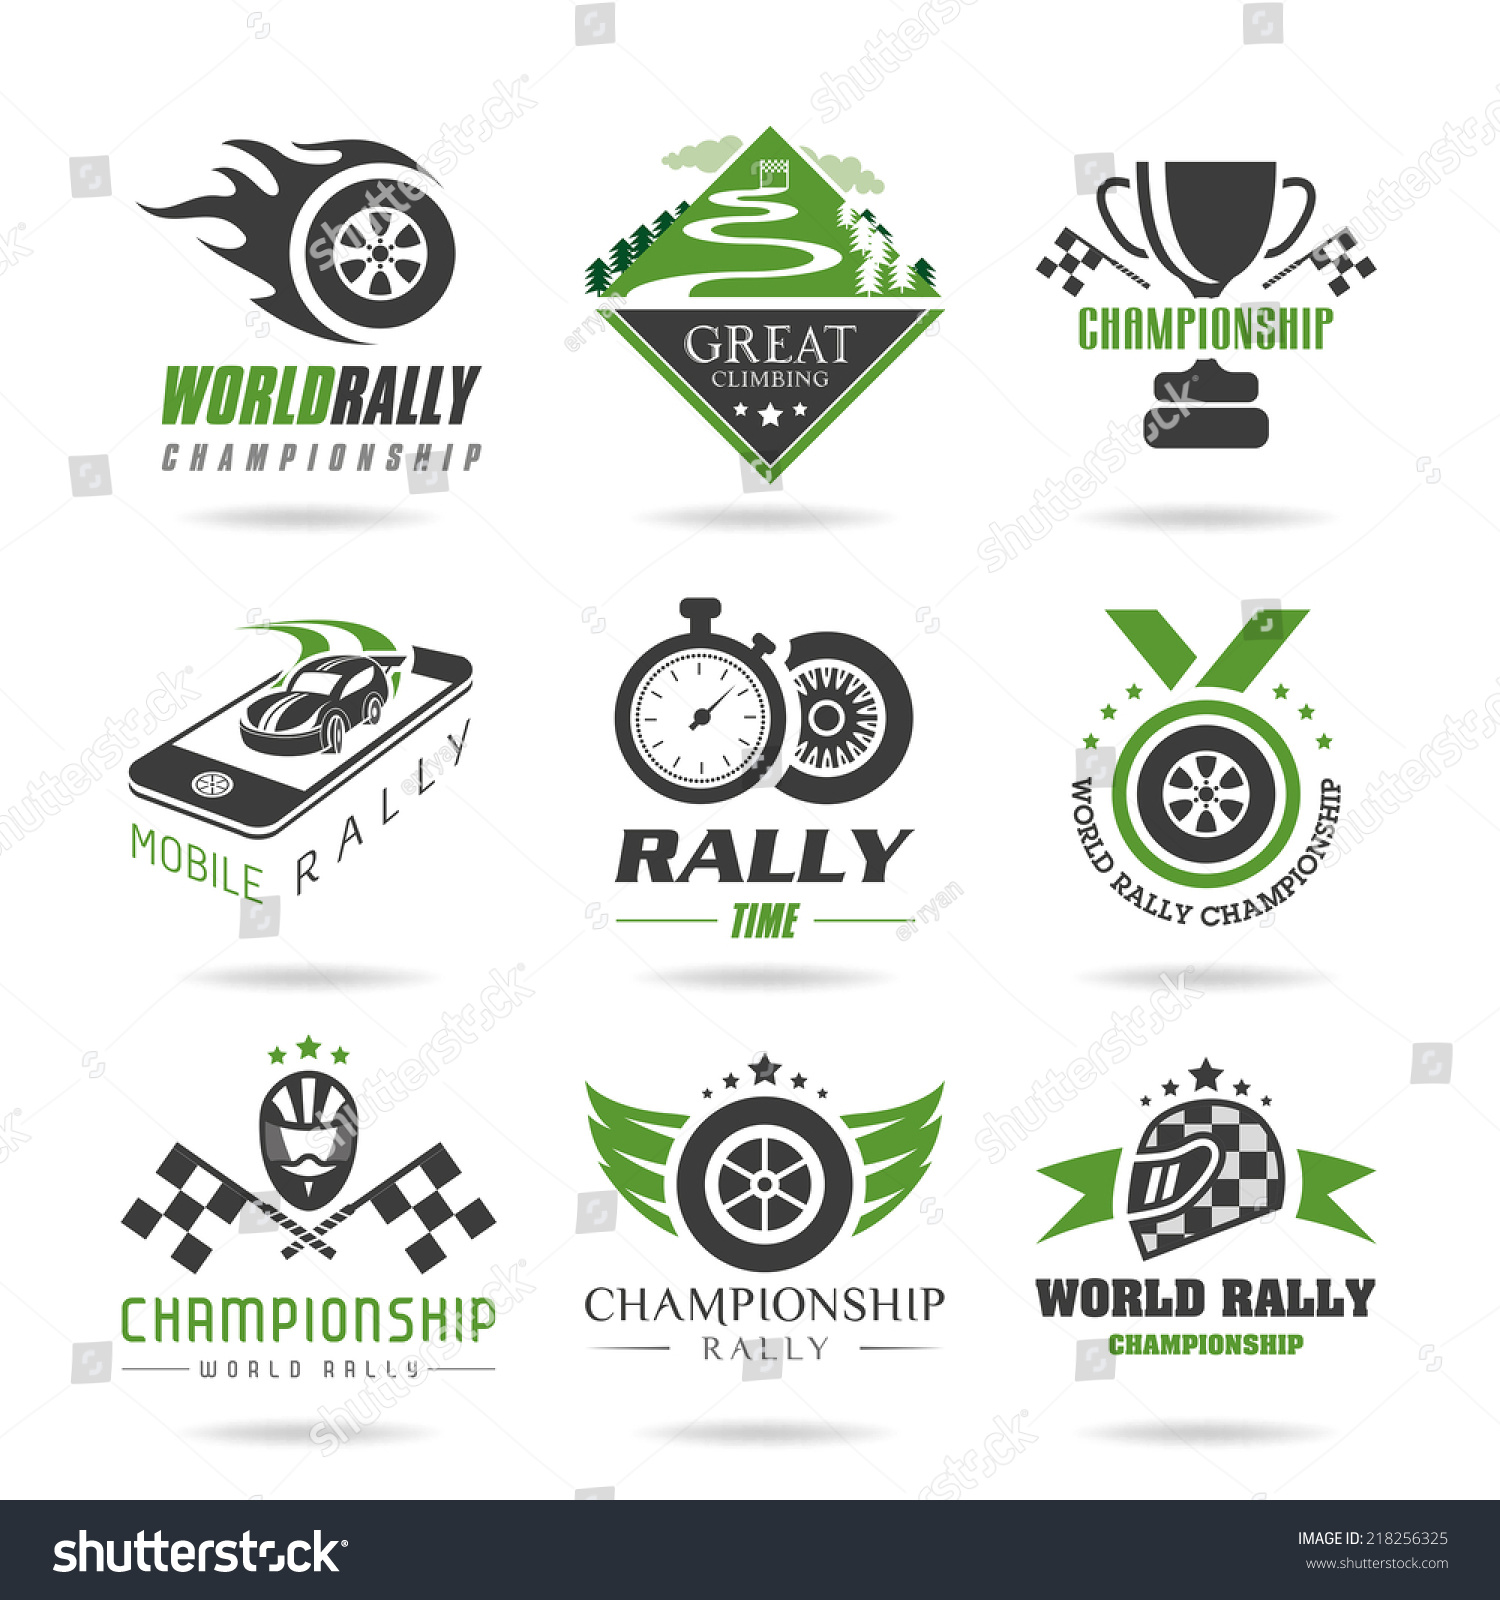 DiRT Rally icon download - iConvert Icons